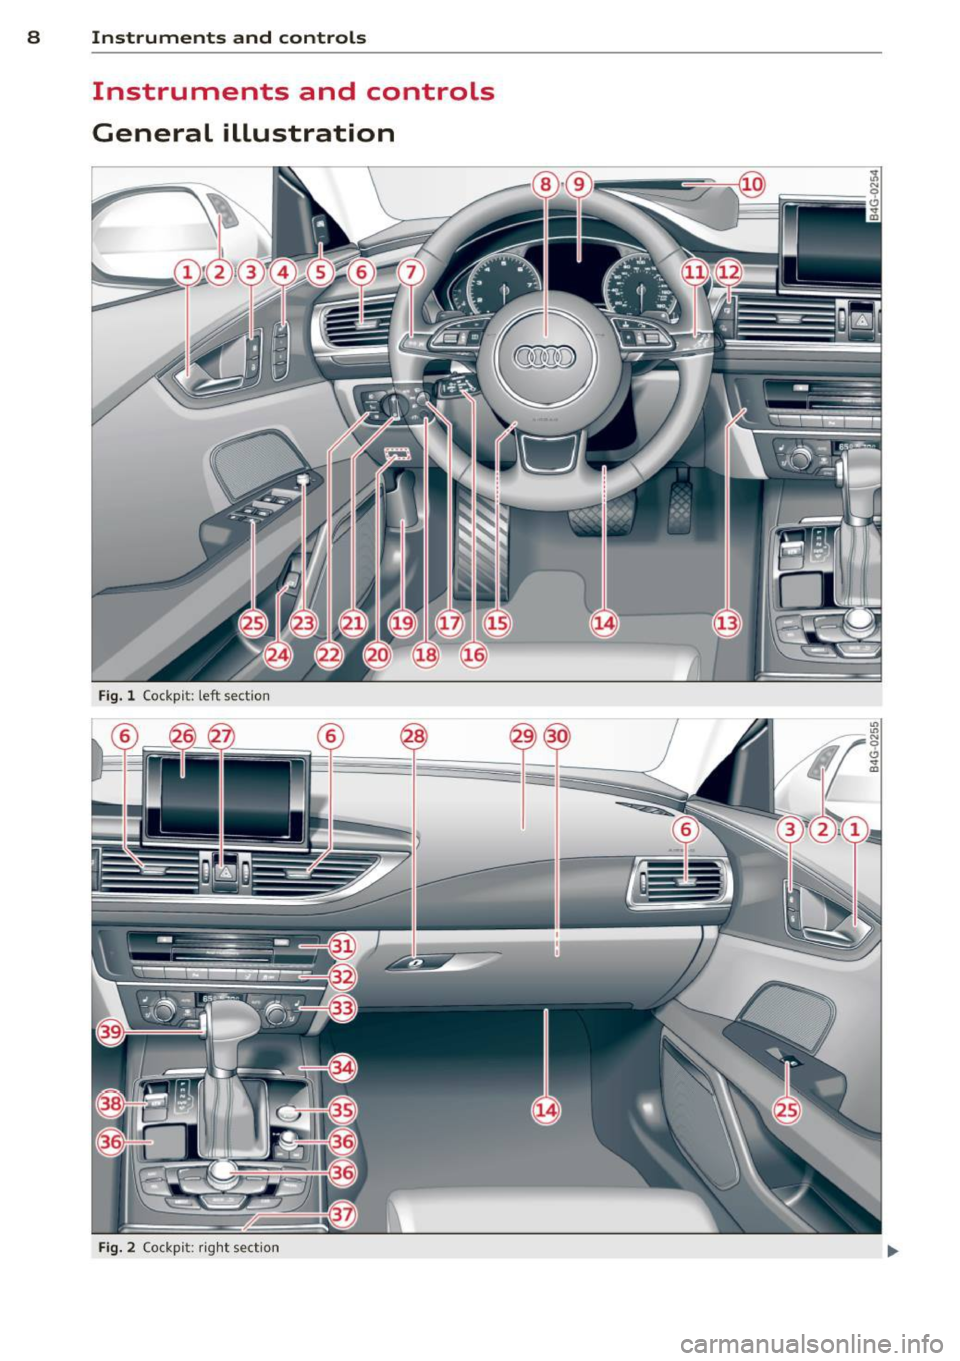 AUDI S7 2014  Owners Manual 8  Instruments and controls 
Instruments  and  controls 
General  illustration 
Fig. l Cockp it:  left  sect io n 
Fig. 2 Co ck pi t: ri ght  sect io n  